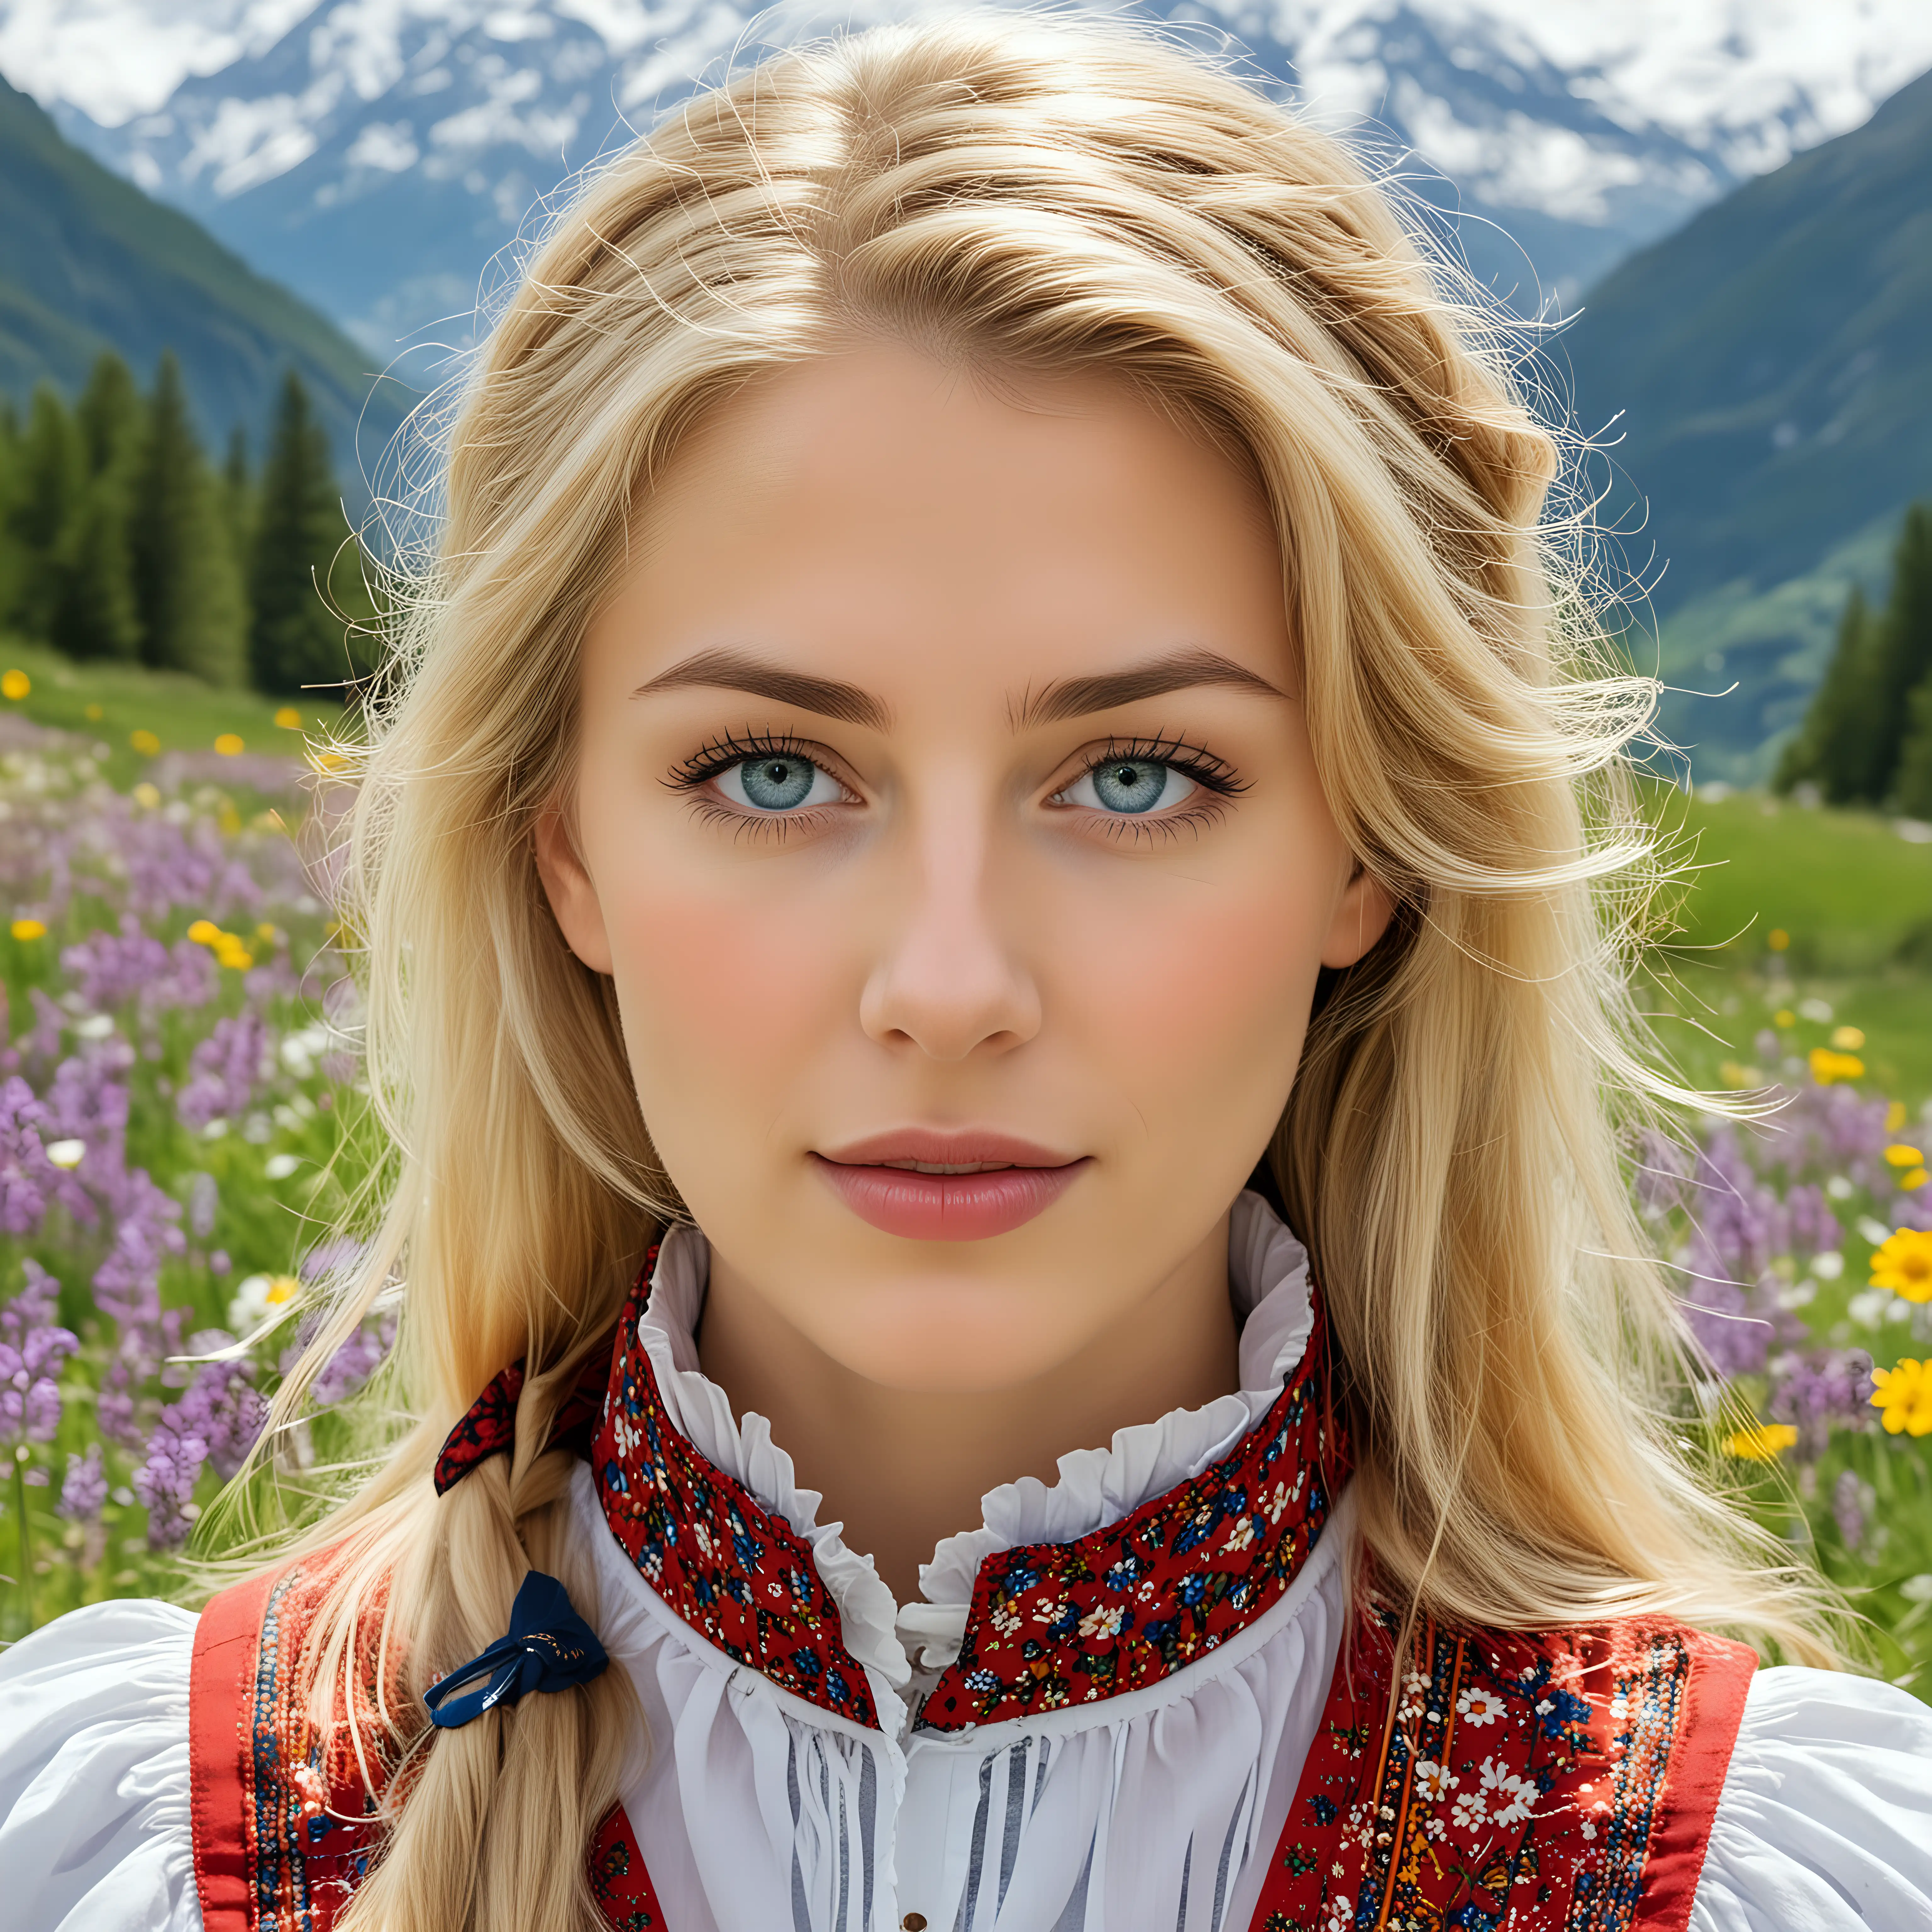 Swiss Woman in Traditional Clothing amidst Alpine Spring Wildflowers